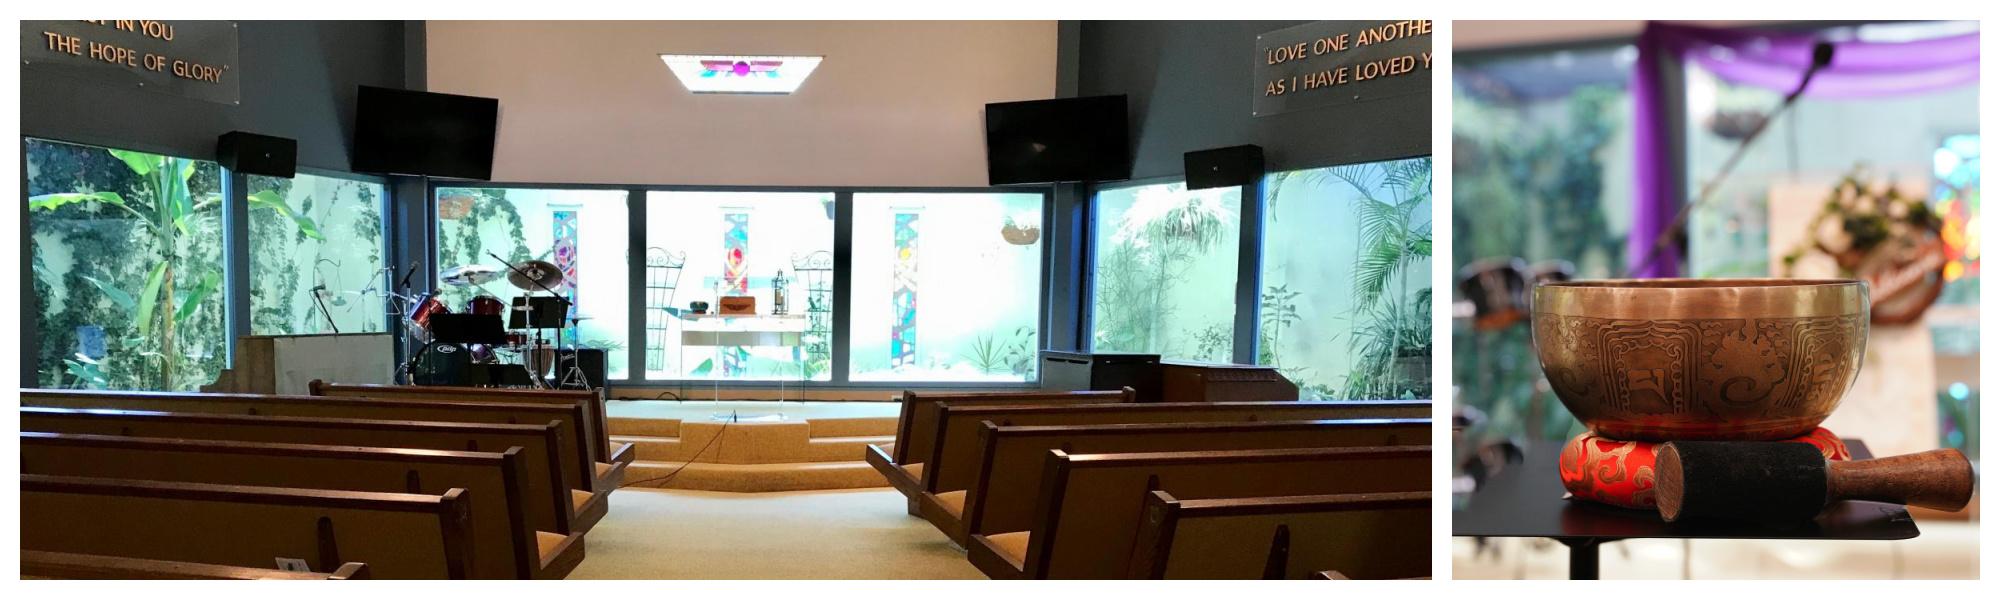 On the left, our sanctuary, an intimate space framed by glass windows revealing an atrium filled with greenery. On the right, a close up image of a brass singing bowl, which we use to start each service.